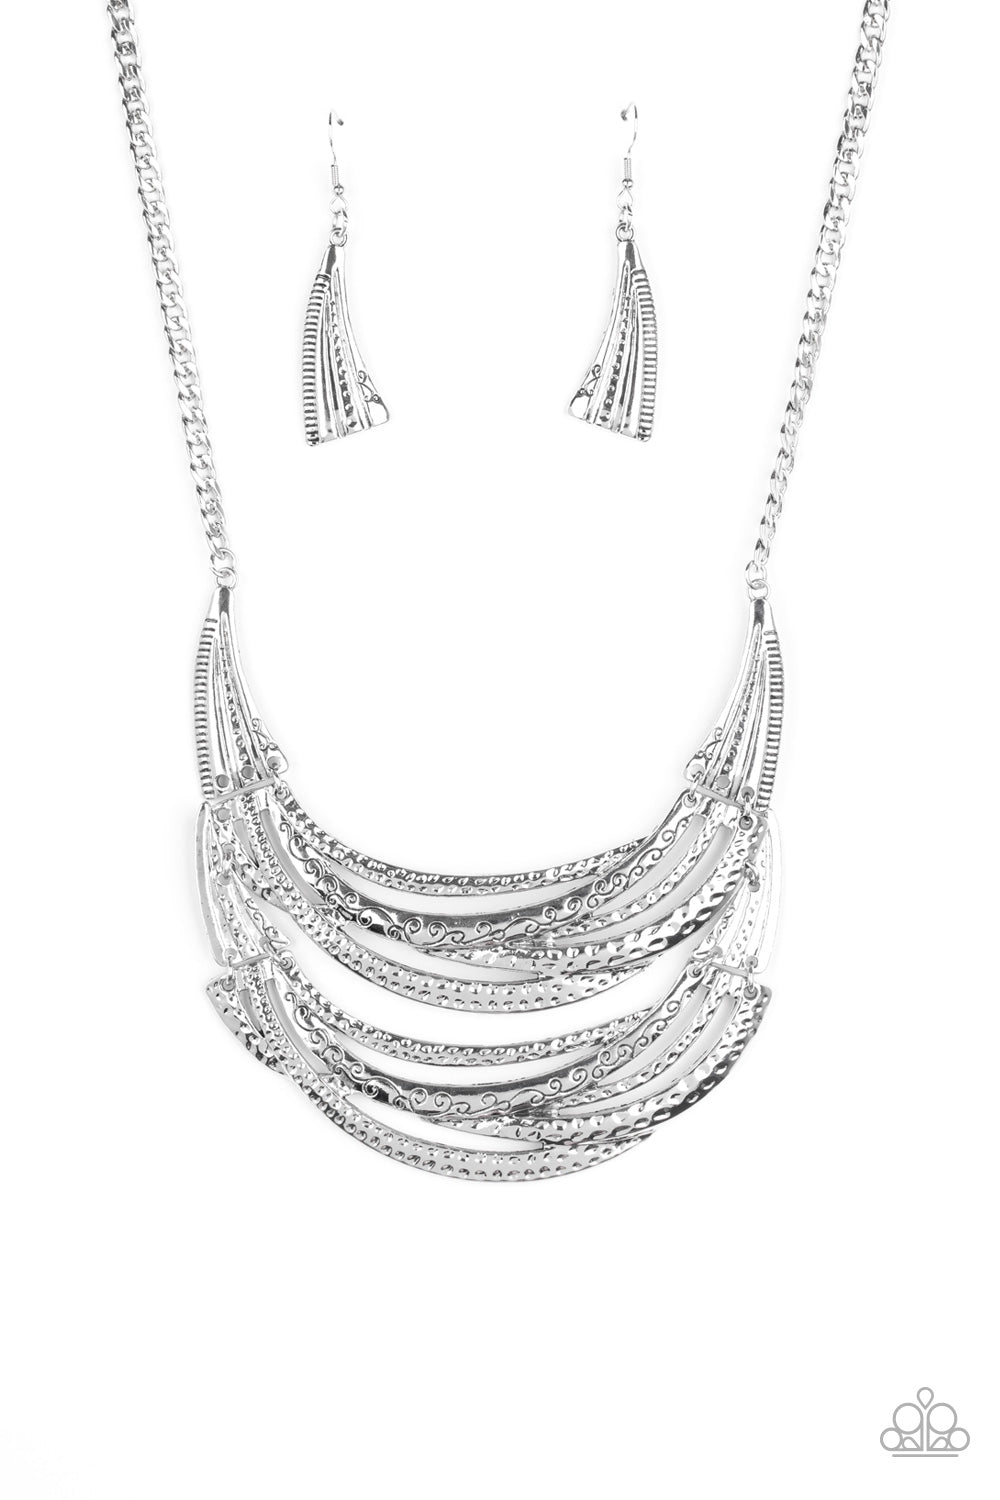 Read Between the VINES Silver Necklace - Paparazzi Accessories Stamped in sections of vine-like patterns, abstract hammered plates and overlapping silver bars link into an exaggerated pendant below the collar for a statement-making look. Features an adjustable clasp closure.  Sold as one individual necklace. Includes one pair of matching earrings.